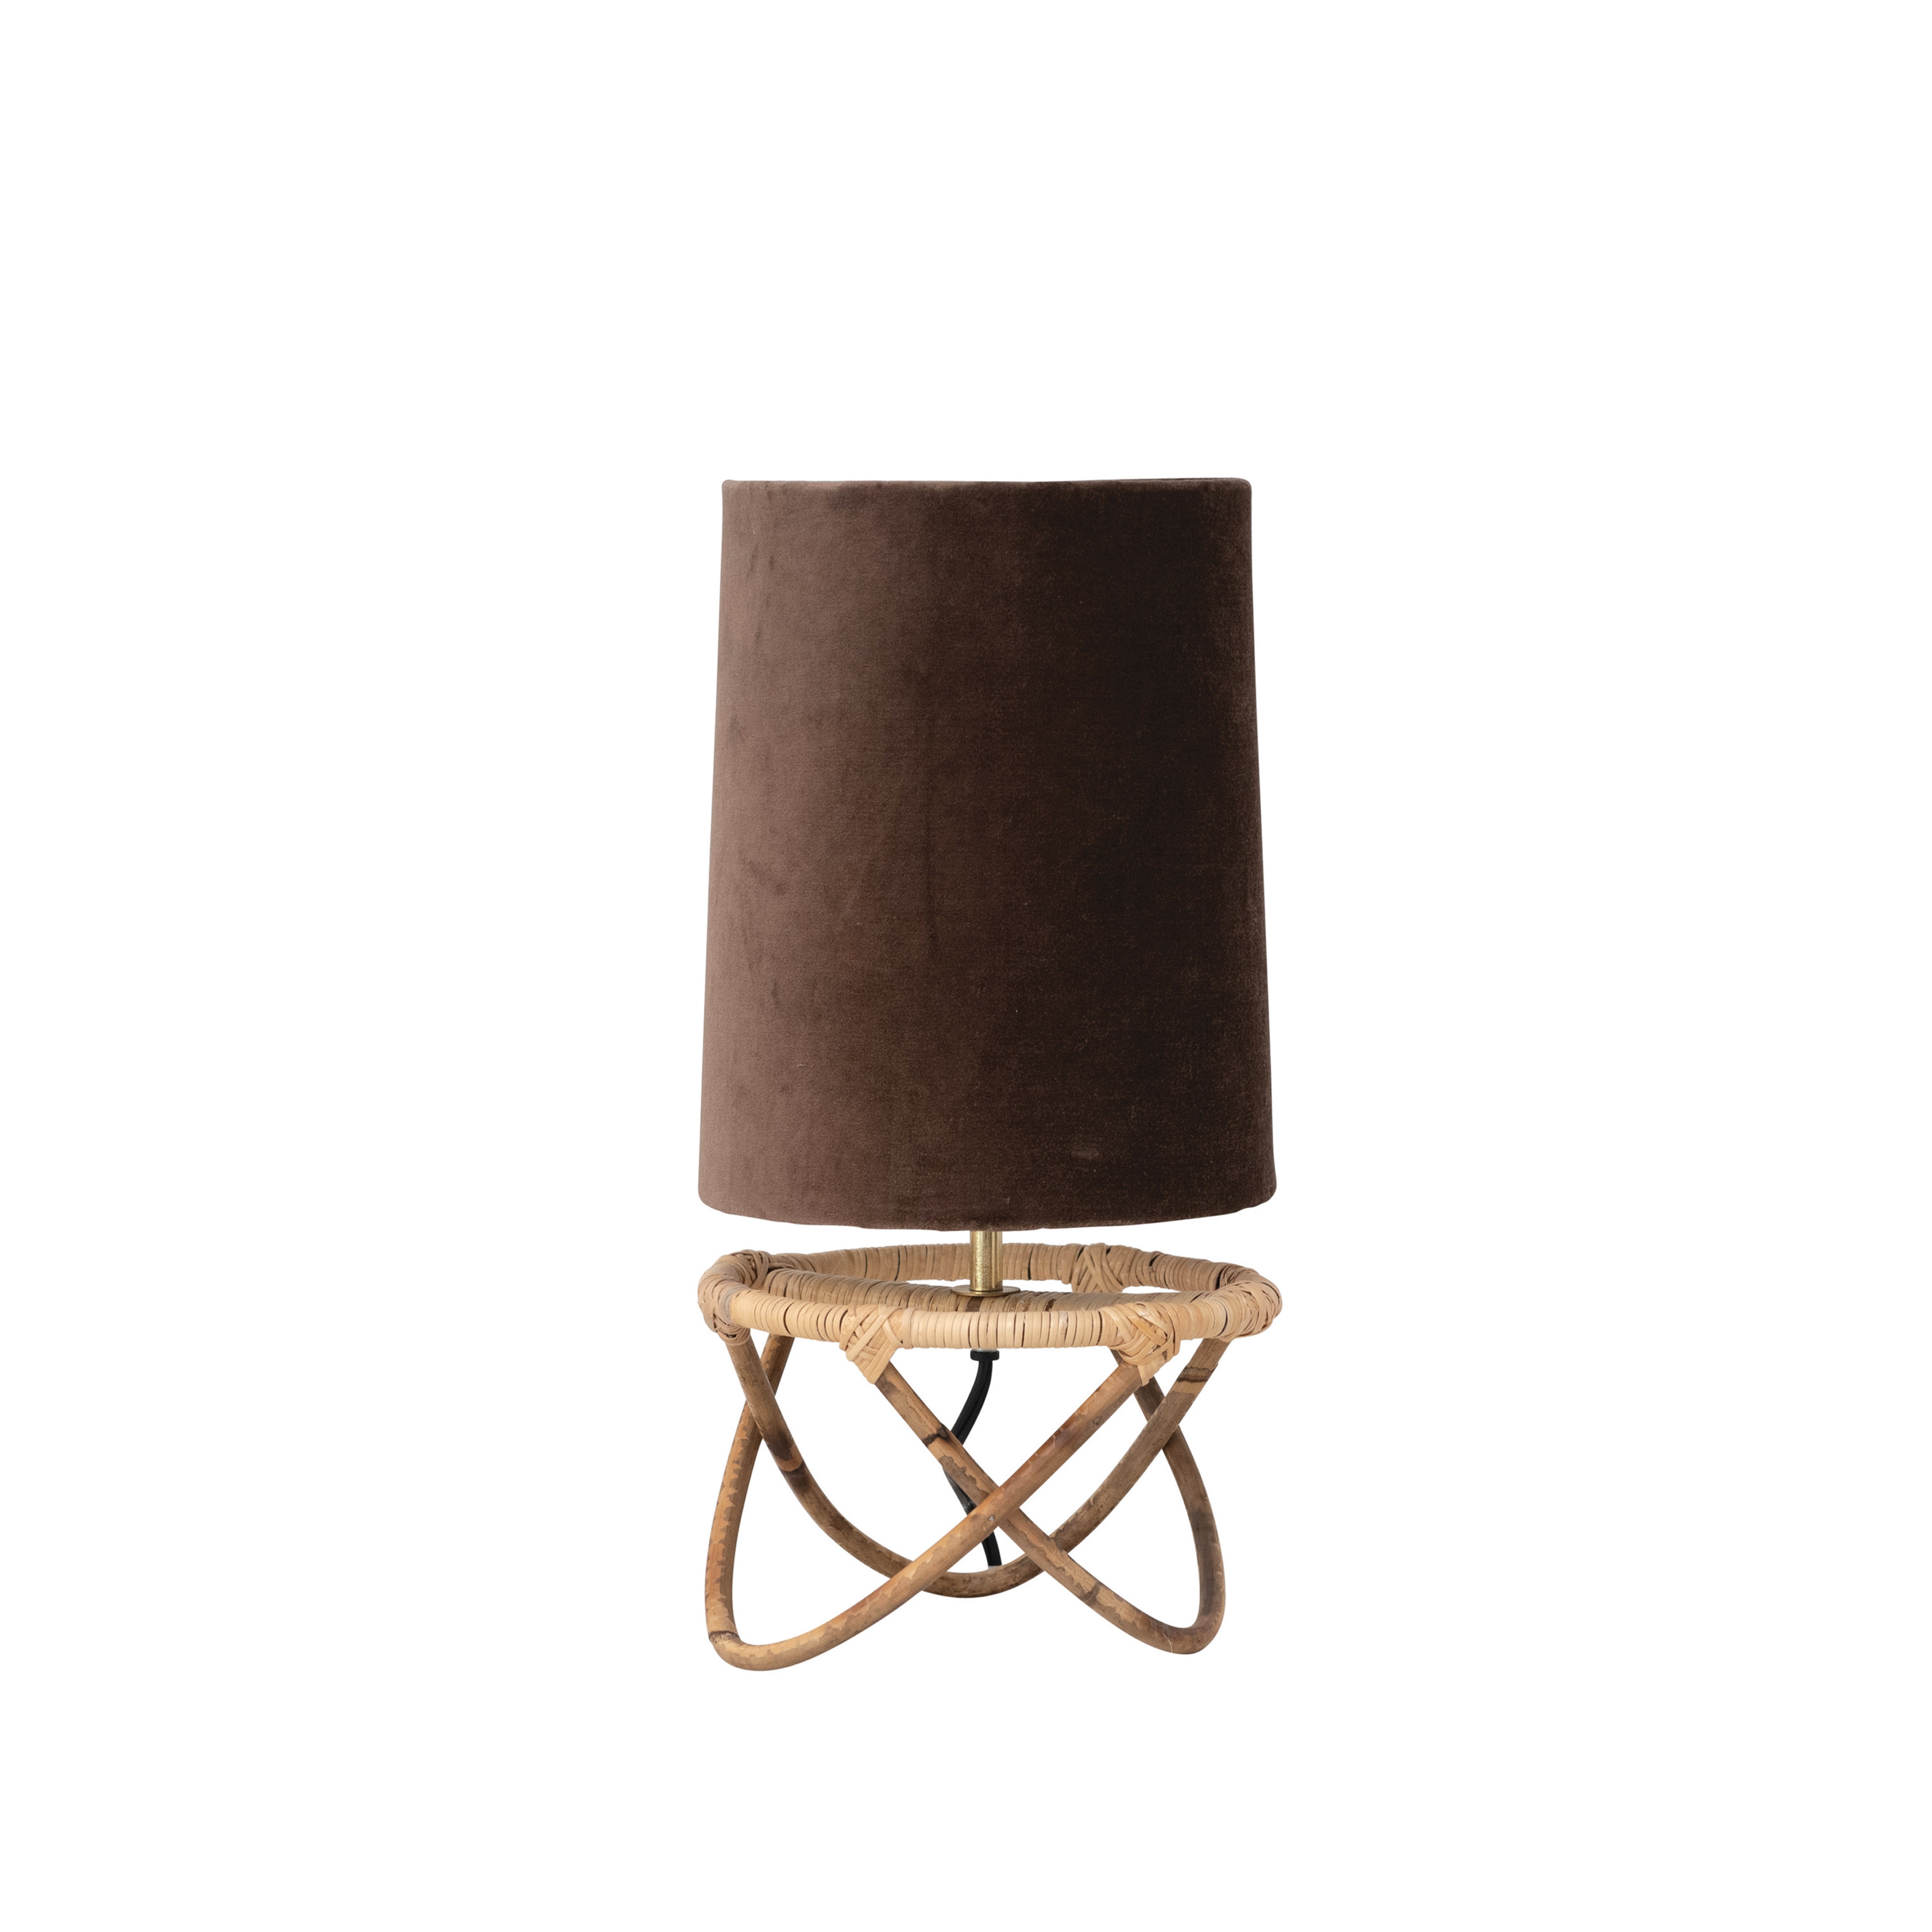  Handwoven Rattan Table Lamp with Cotton Velvet Shade, Natural and Brown - Image 0